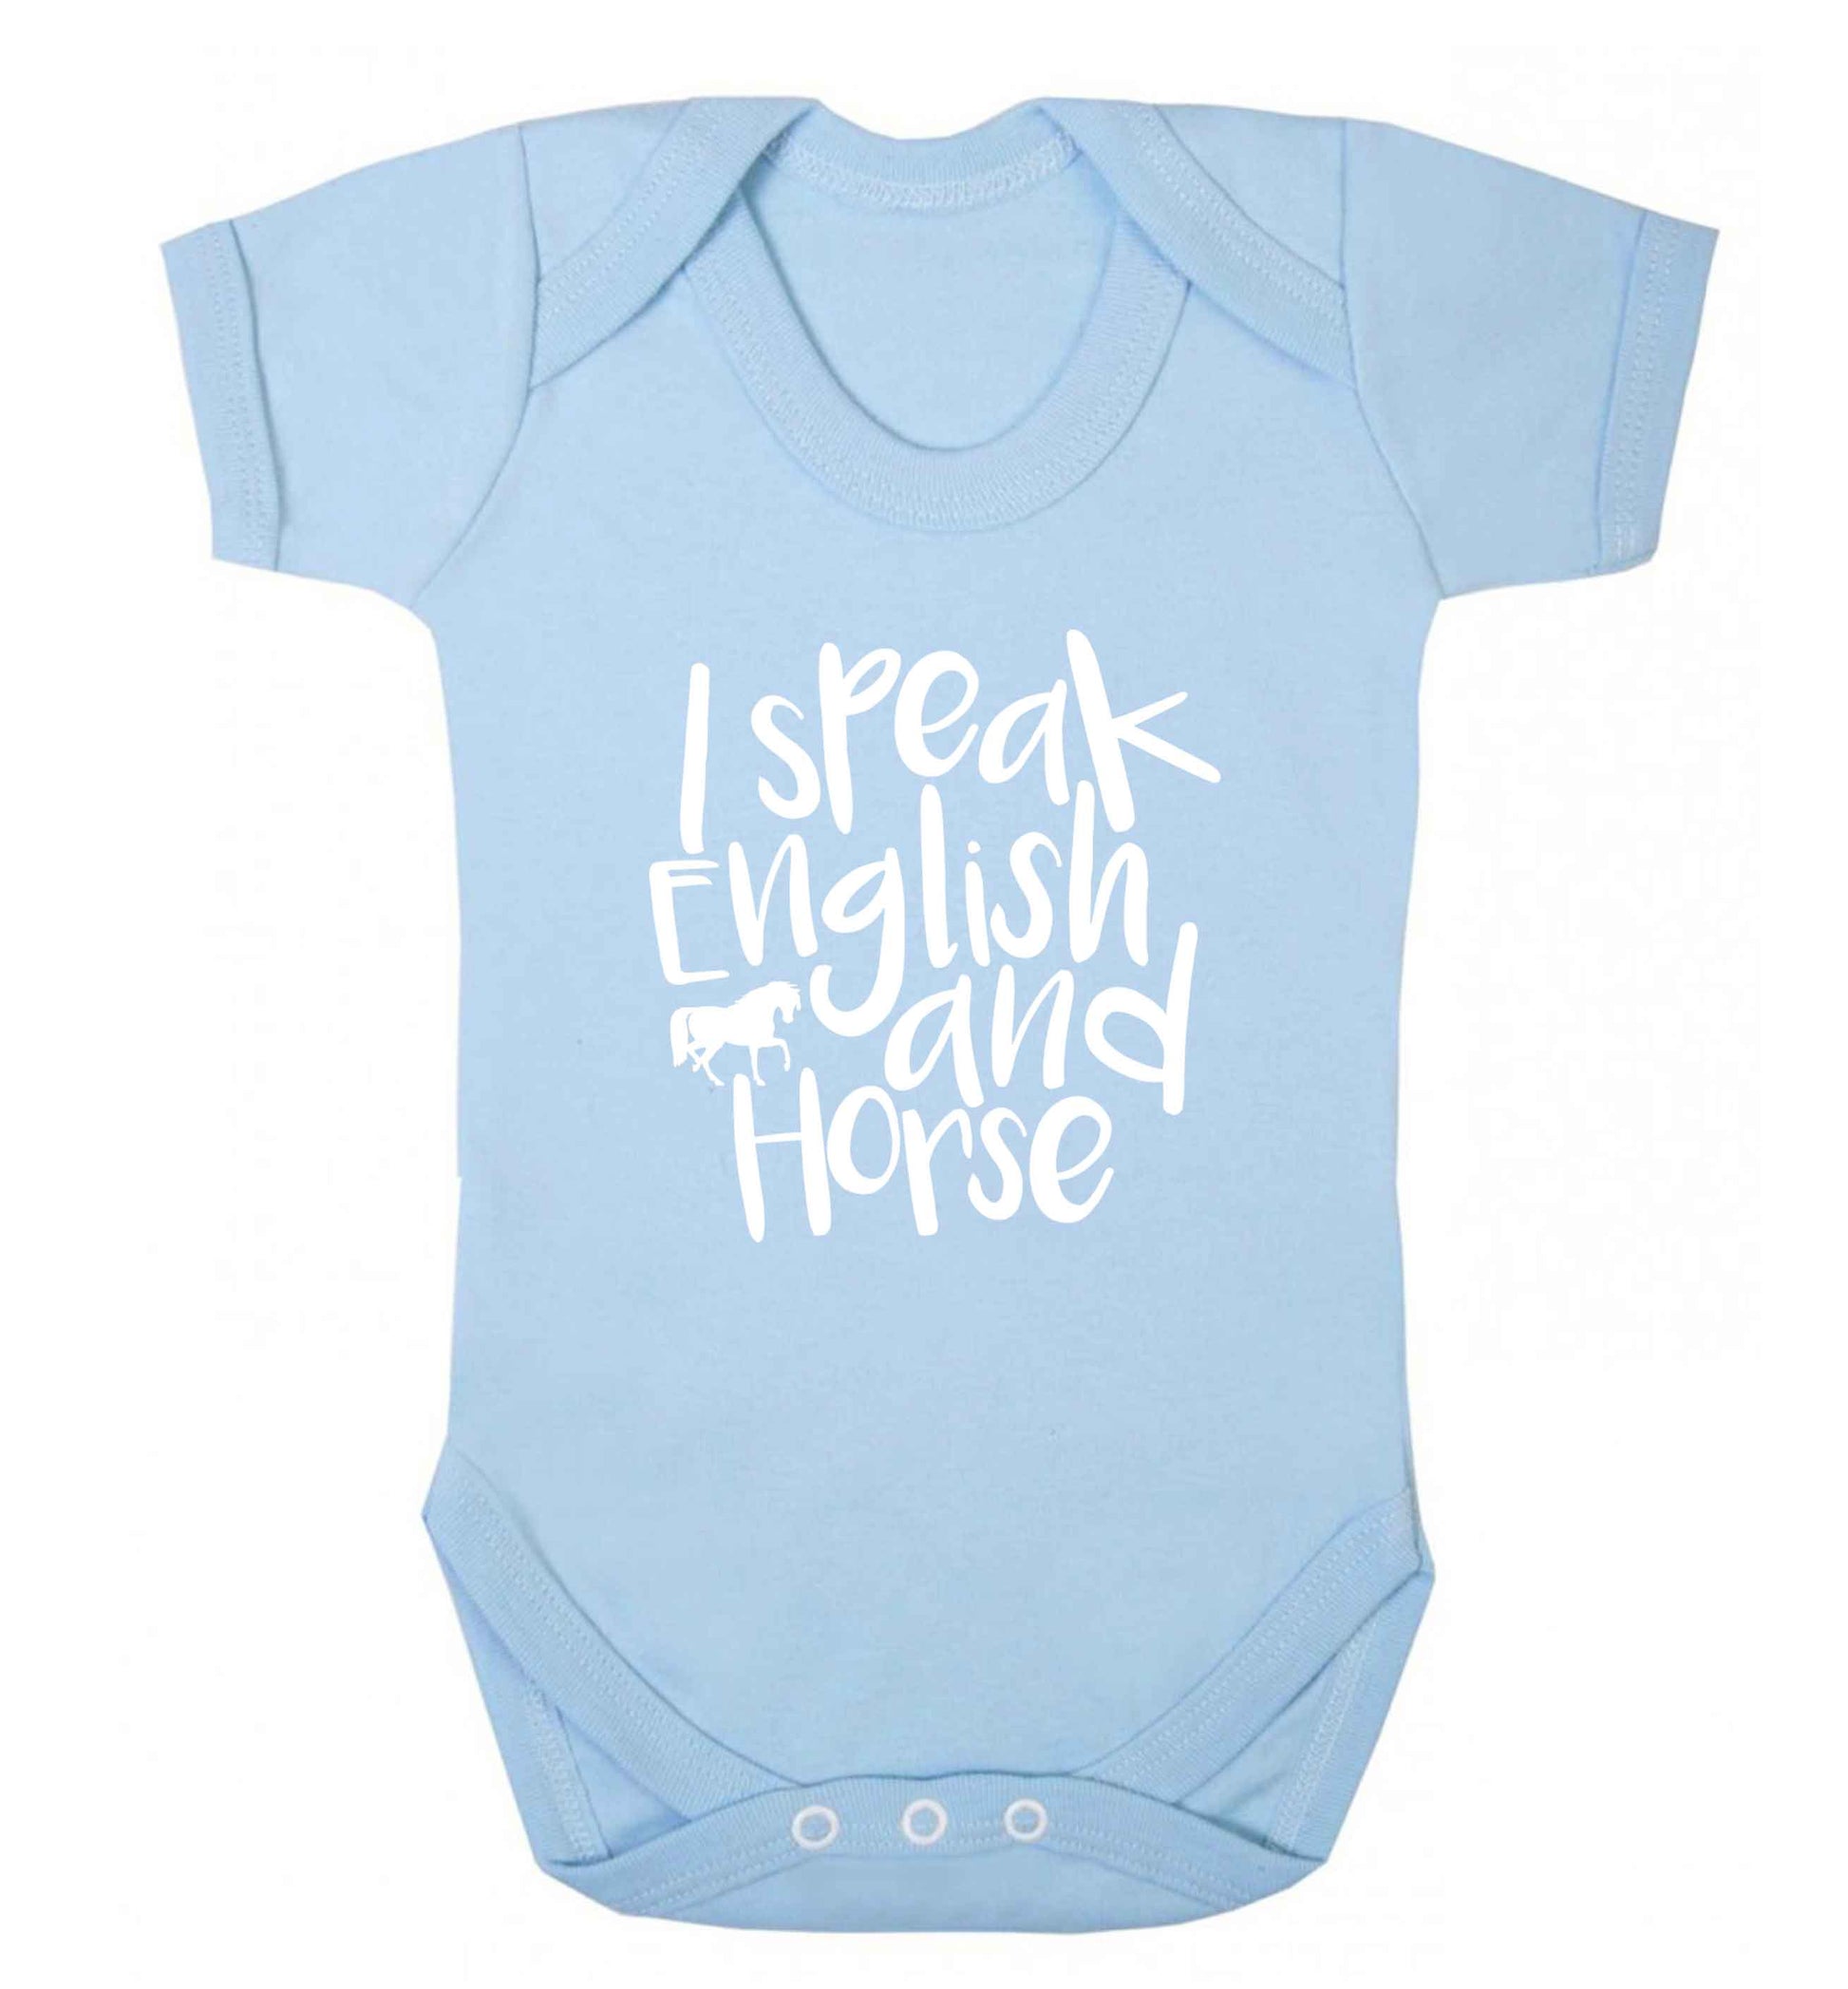 I speak English and horse baby vest pale blue 18-24 months